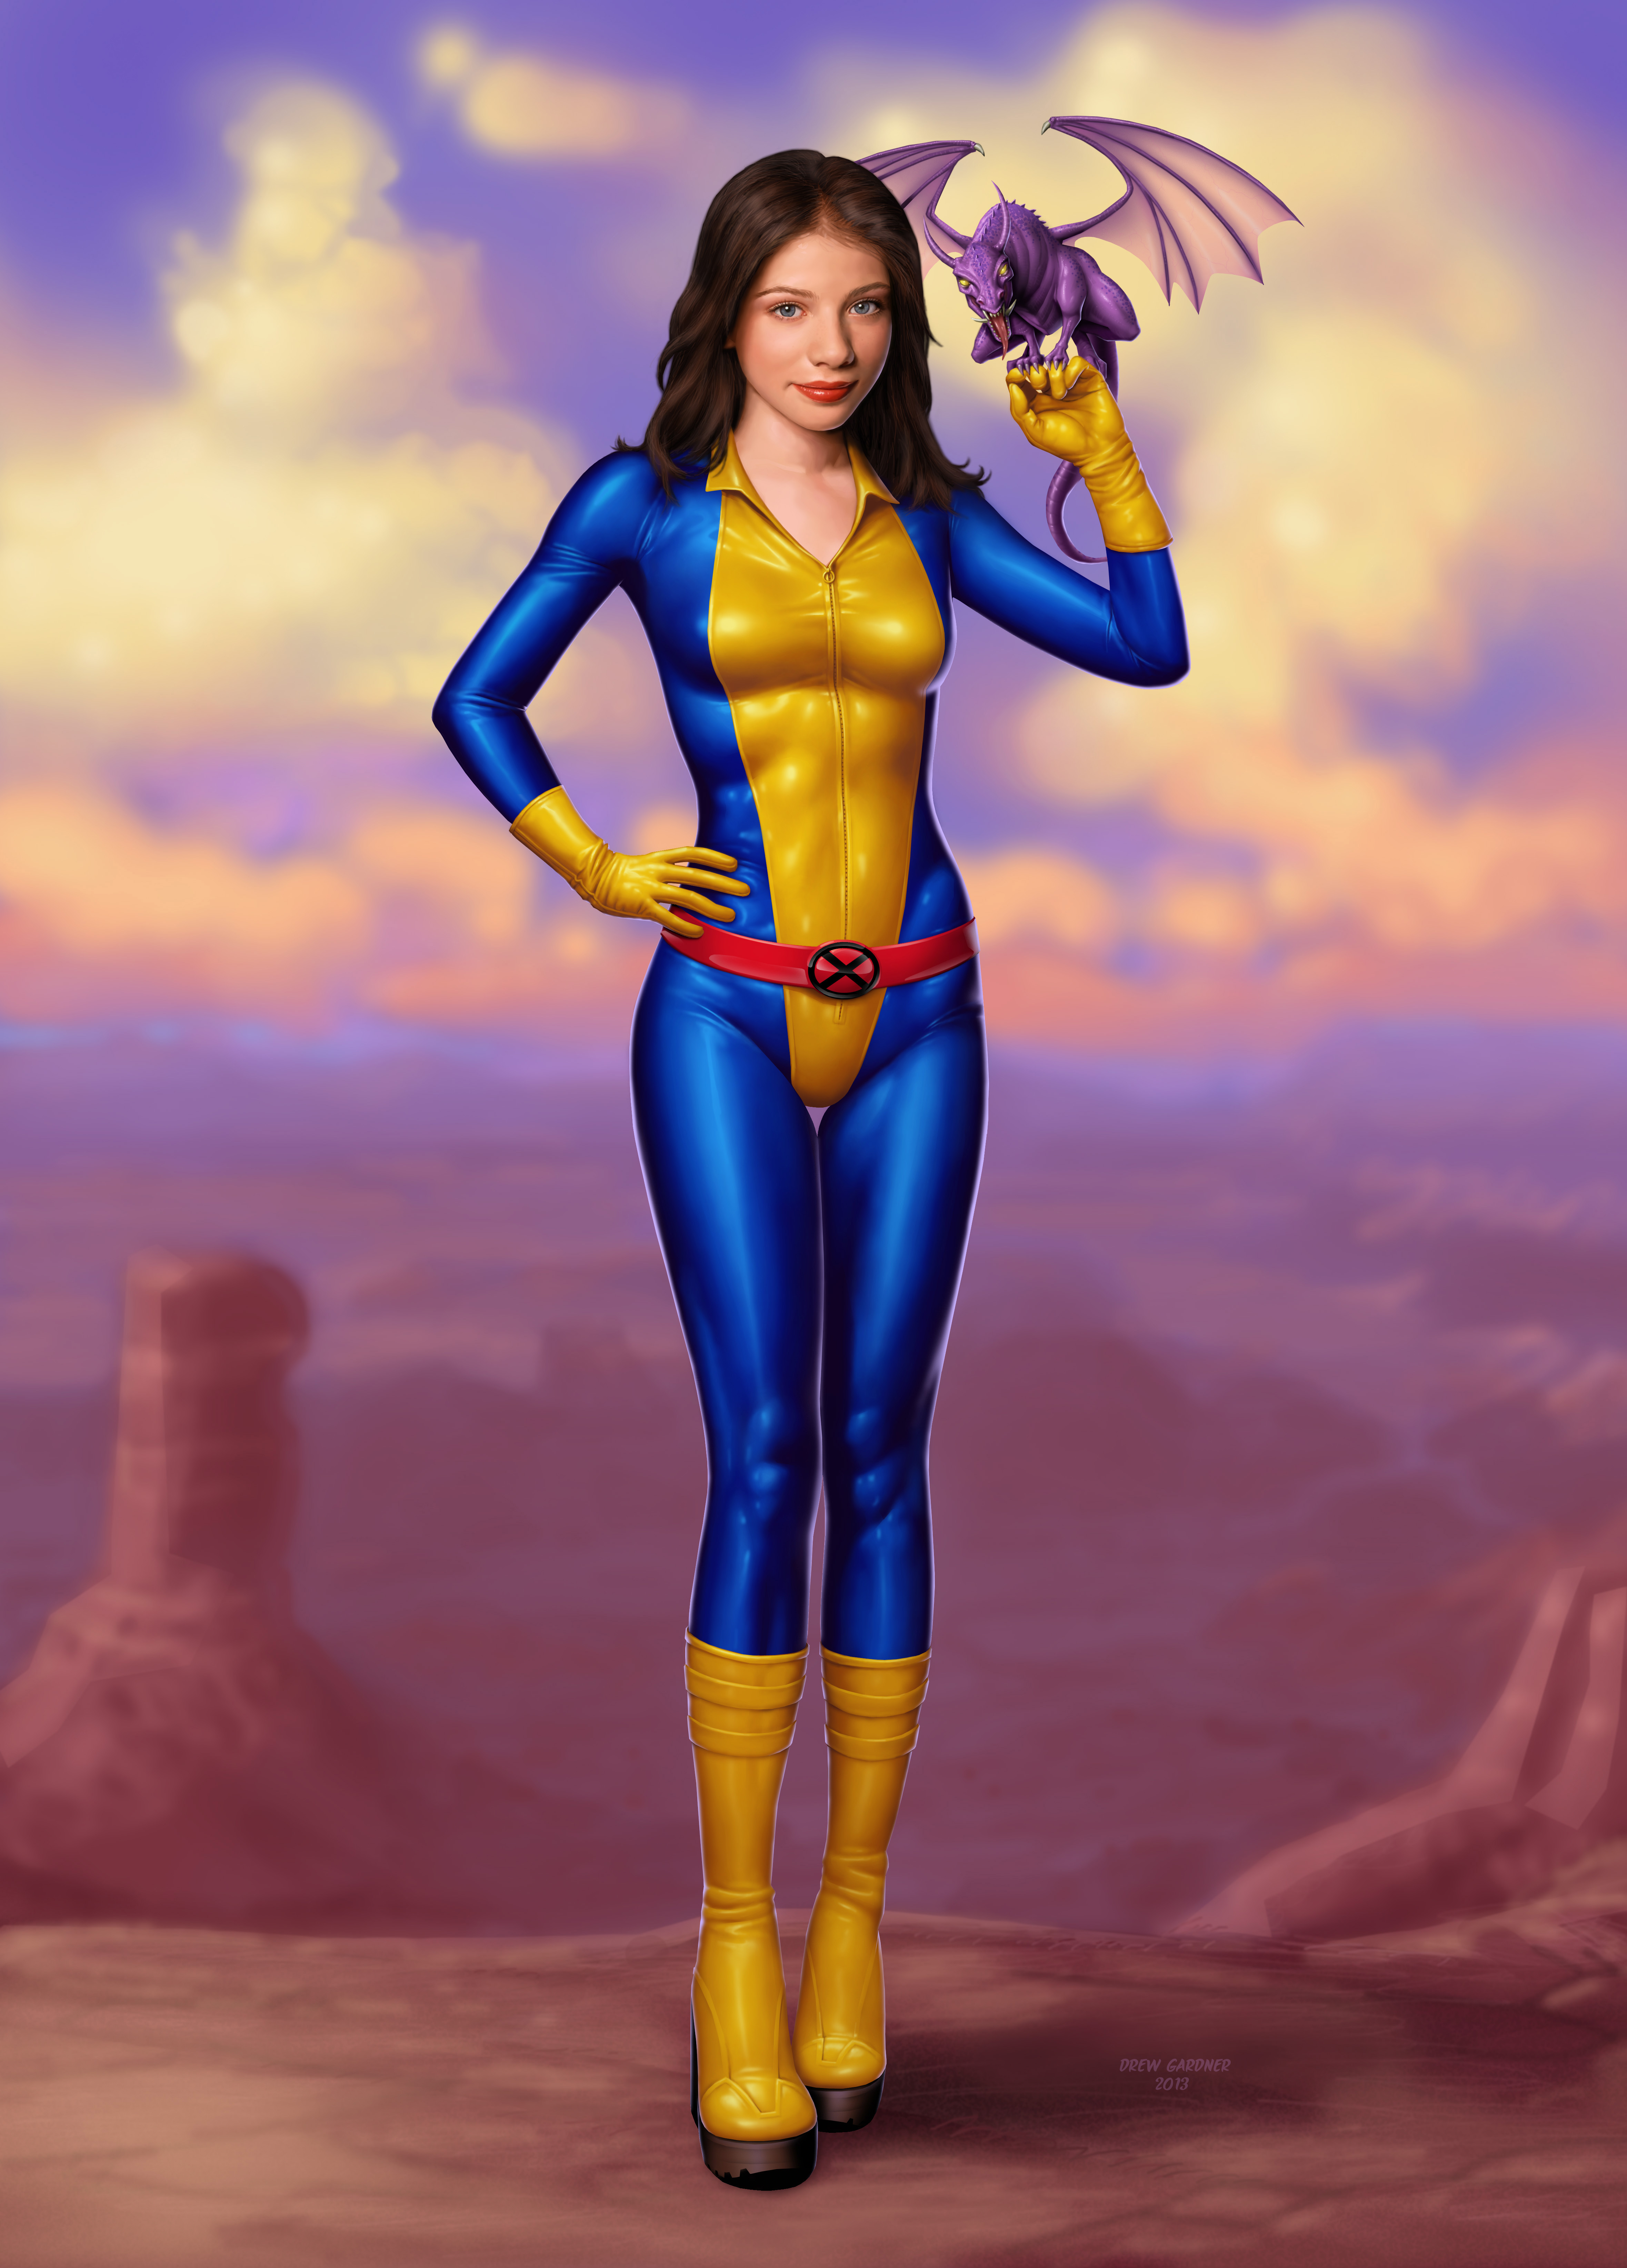 HQ Kitty Pryde Wallpapers | File 2301.59Kb